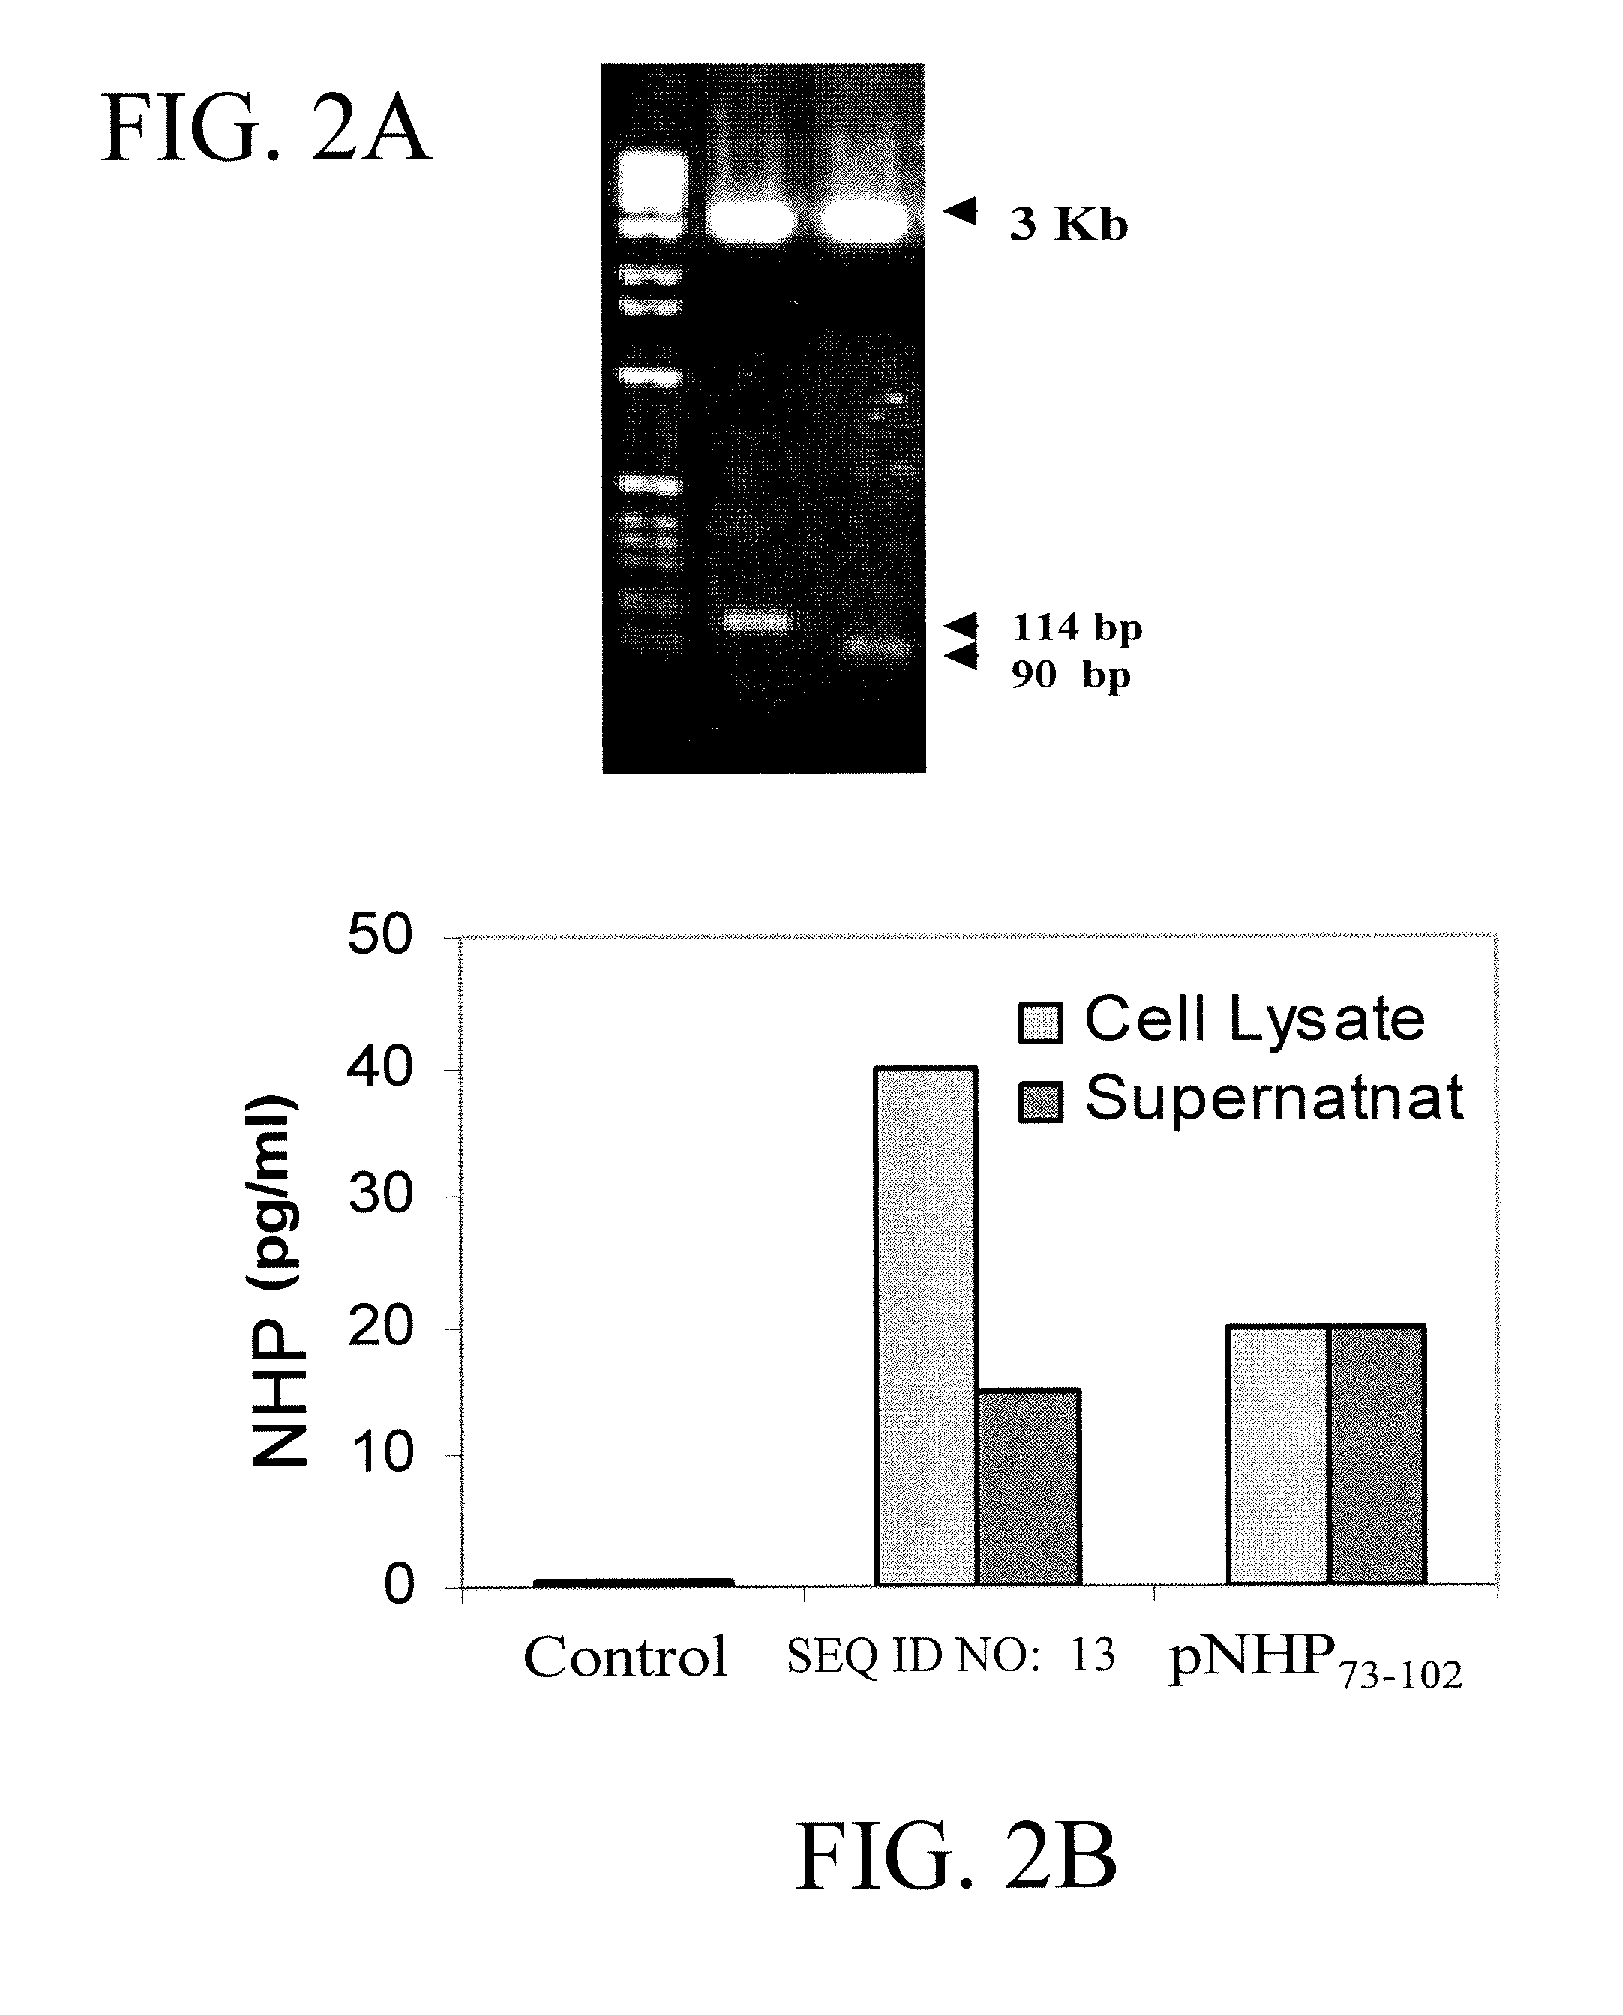 Materials and Methods for Treatment of Allergic Diseases